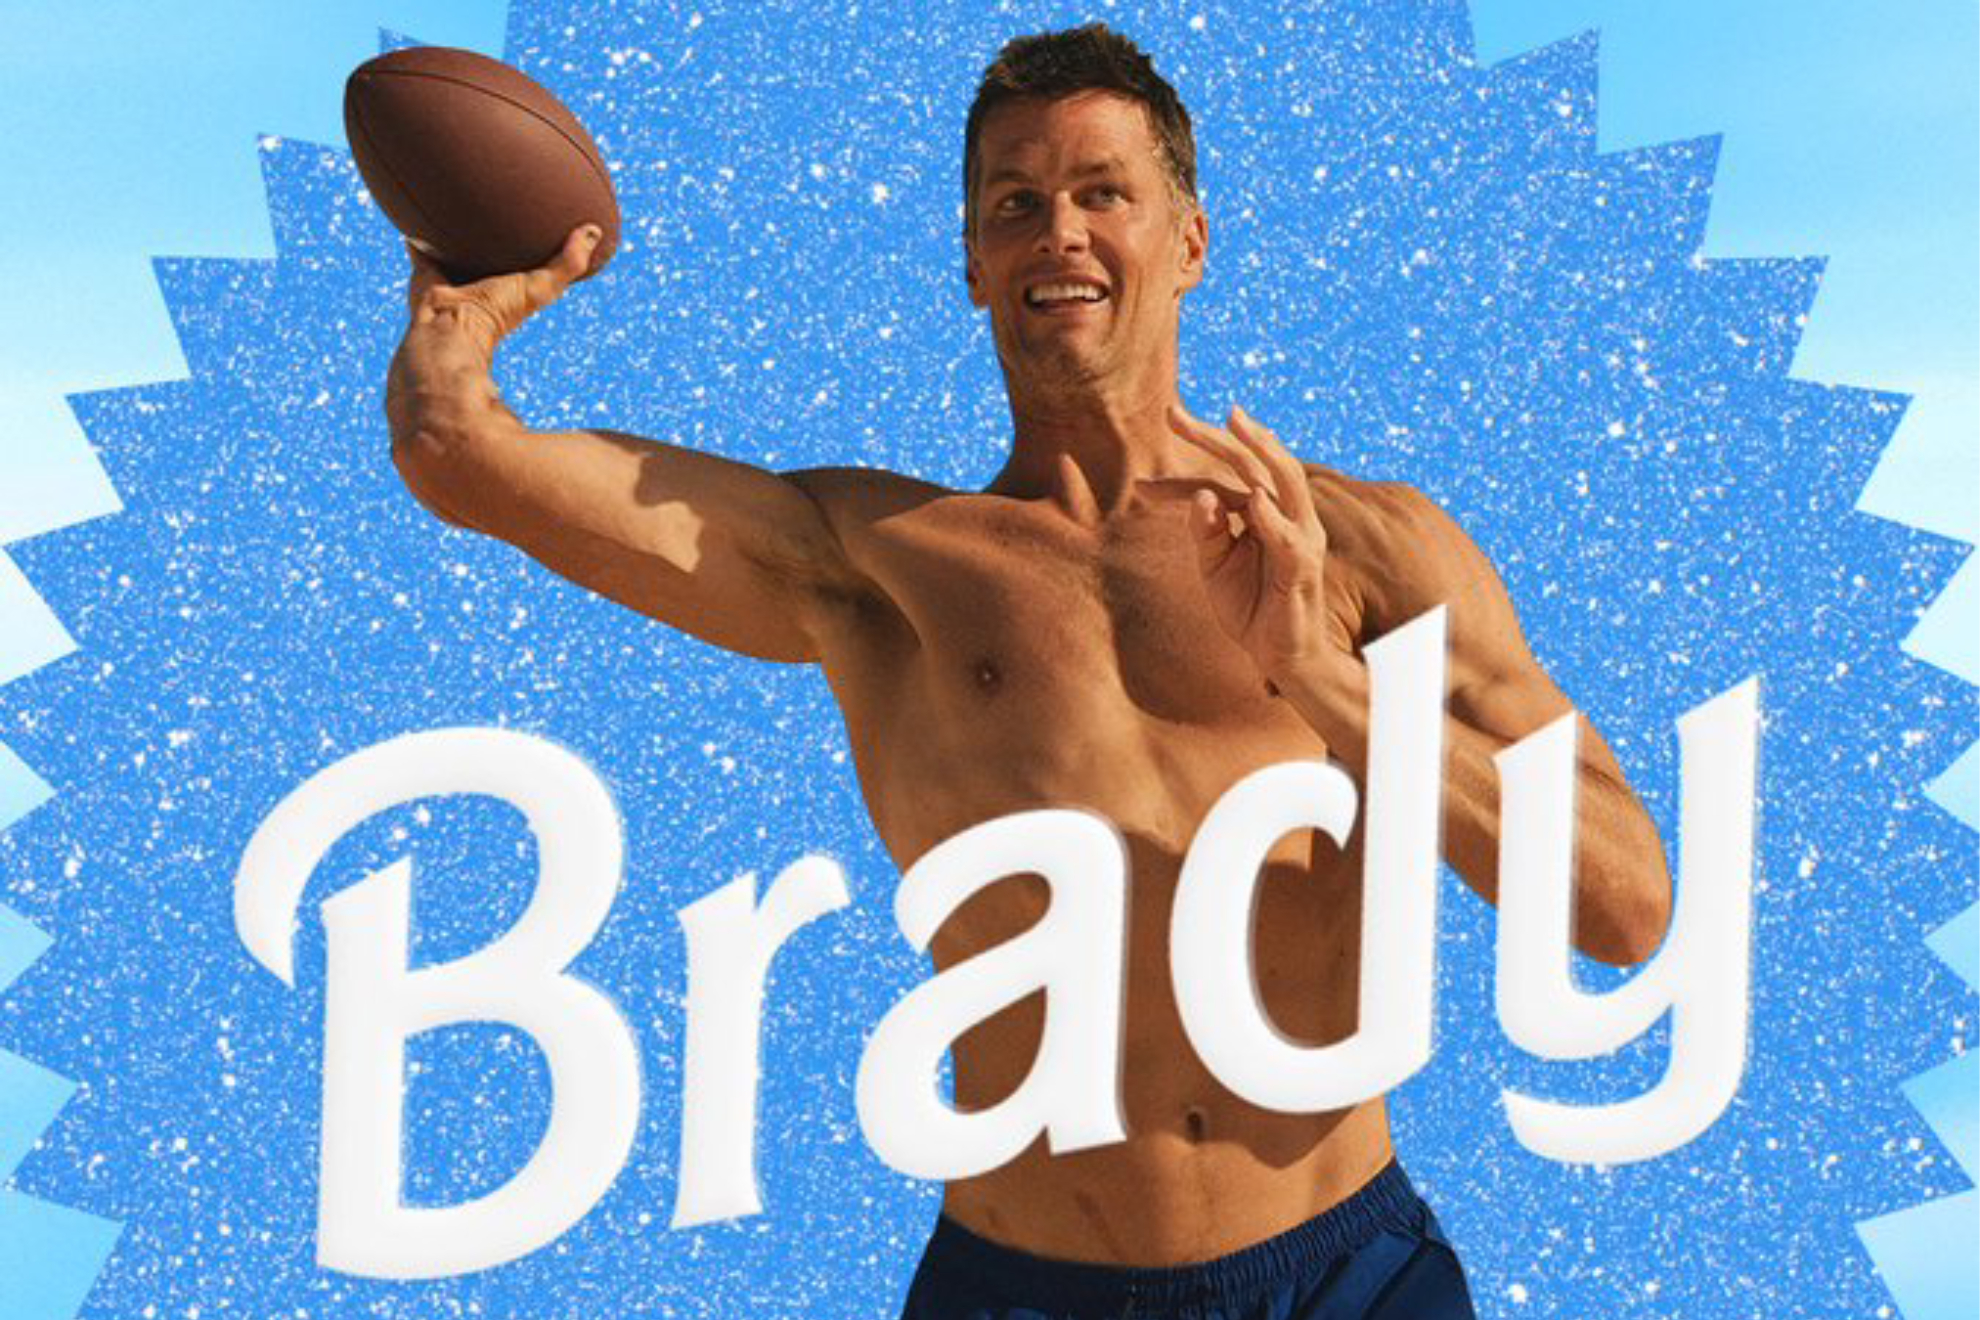 Tom Brady got the 'Barbie' meme treatment from his own brand's community manager.